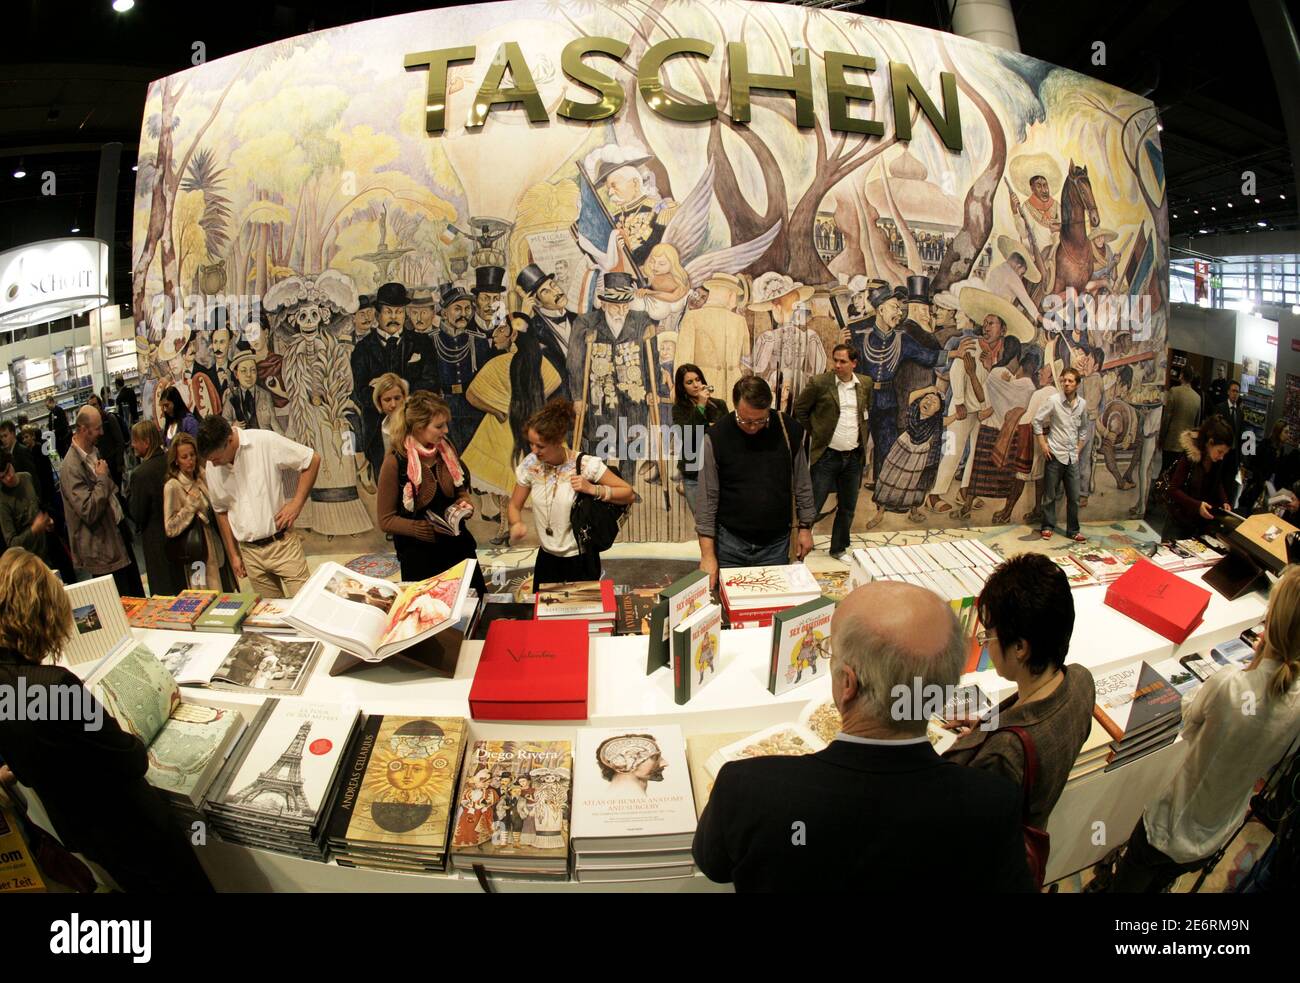 Visitors look at books of the German publishing house "Taschen" at the  Frankfurt book fair, October 10, 2007. The world's largest bookfair will be  open to public from October 10 to October